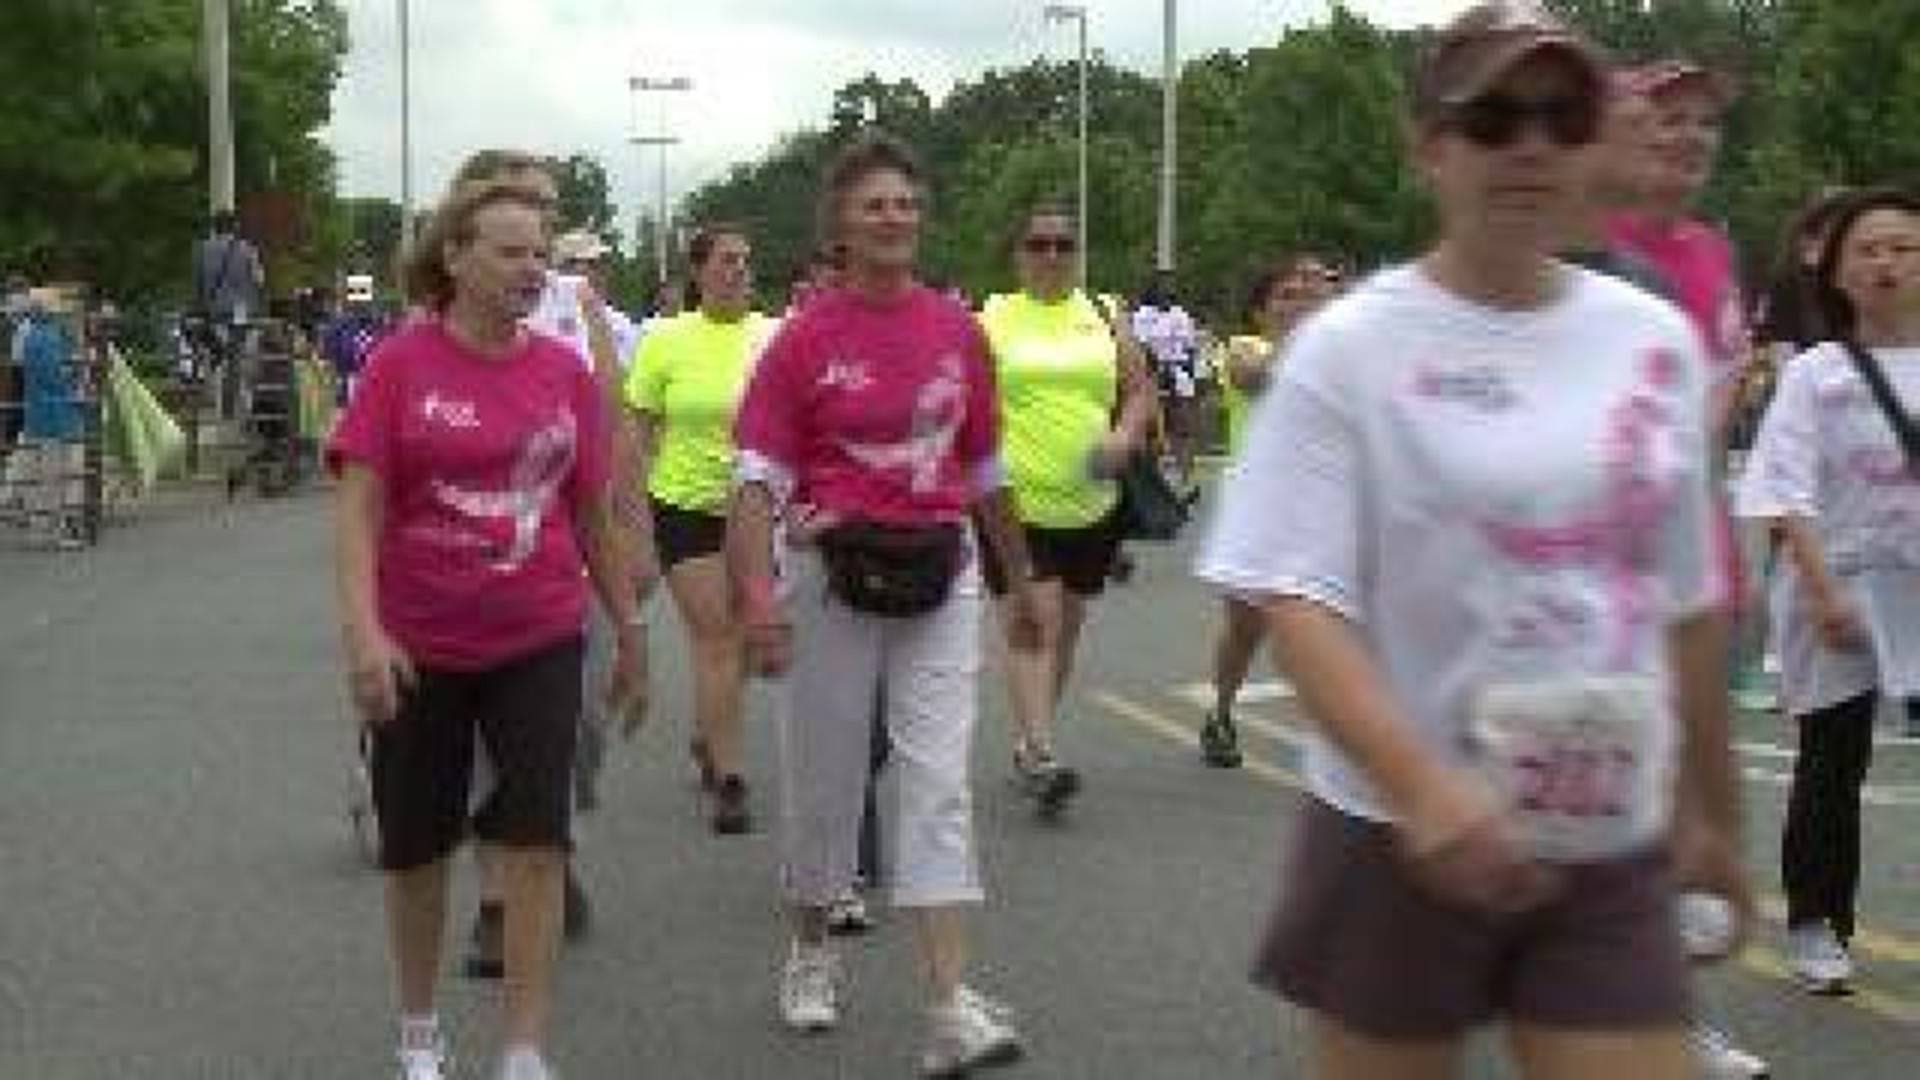 Race for the Cure: Celebrating 15 Years